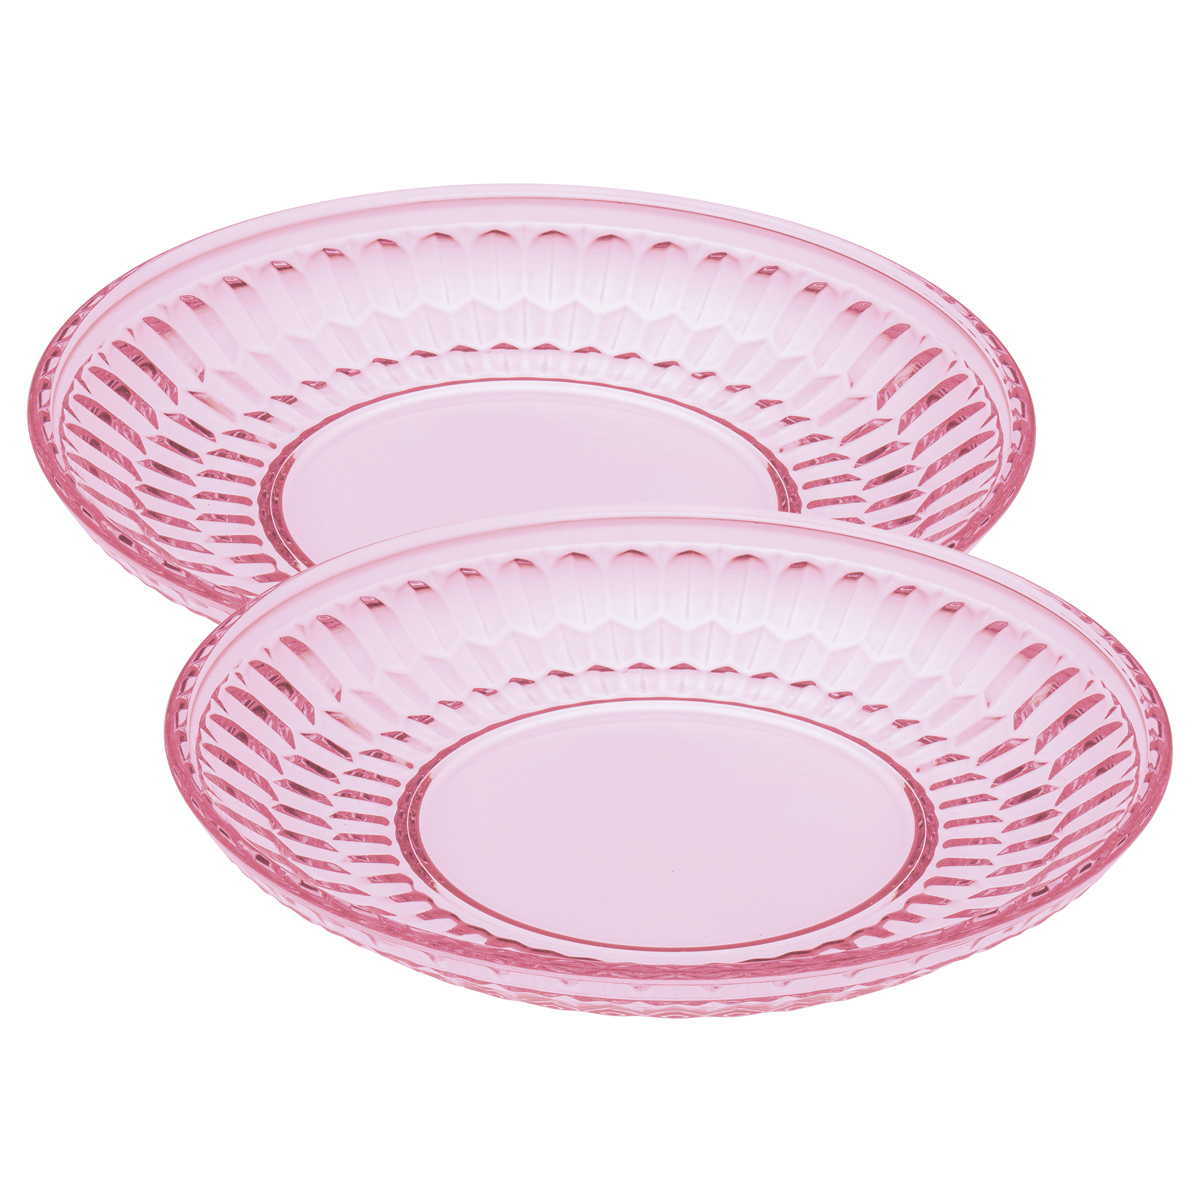 Villeroy and Boch Boston Colored Salad Plate Pair Rose